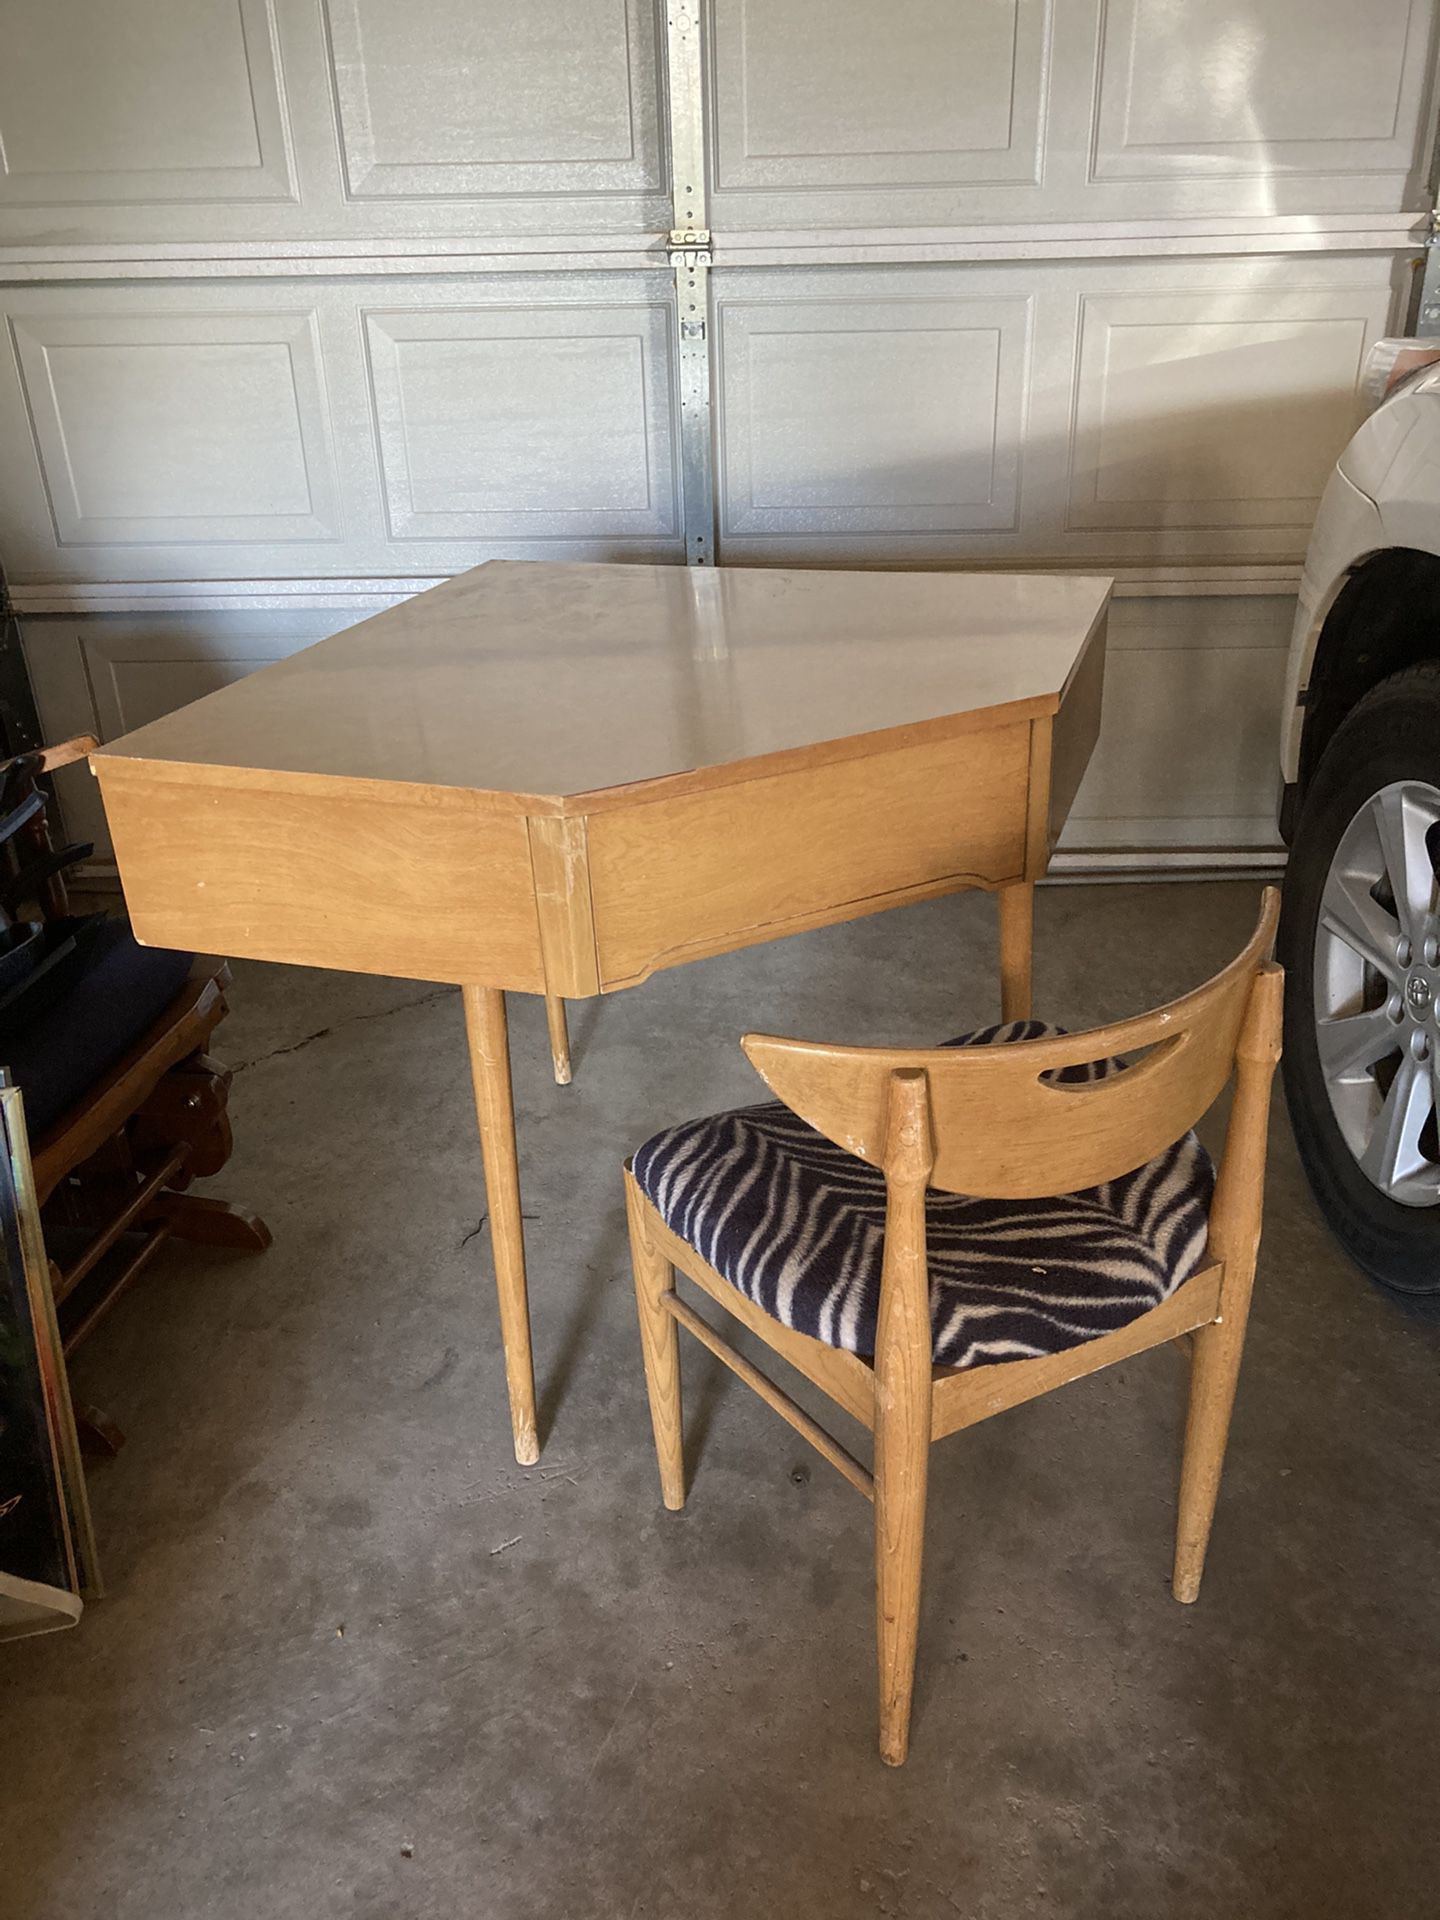 Corner Desk And Chair 